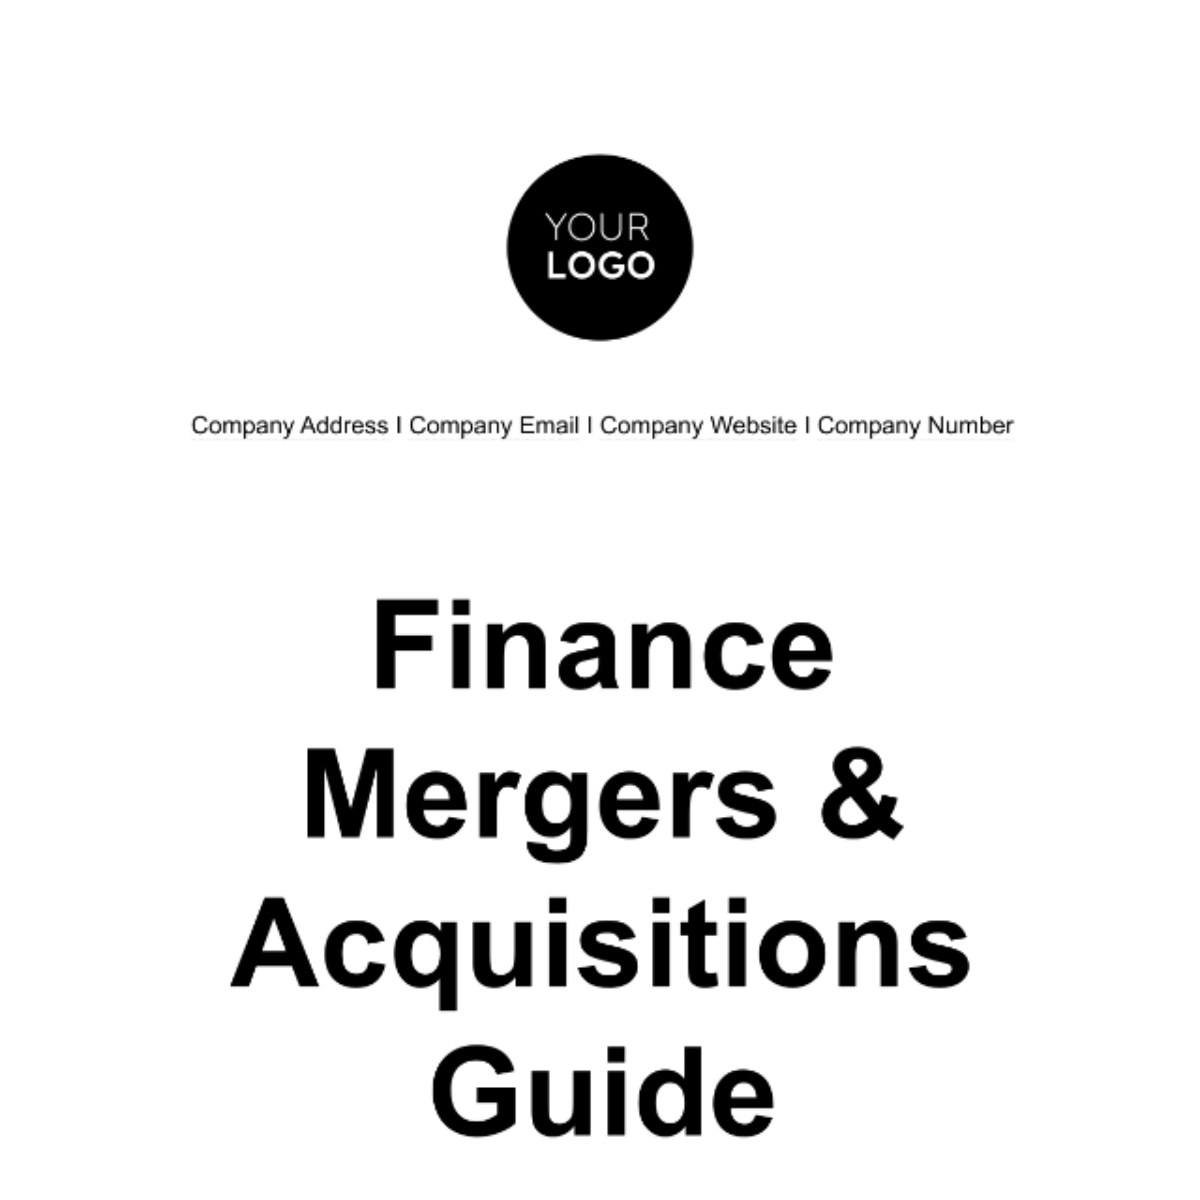 Finance Mergers & Acquisitions Guide Template